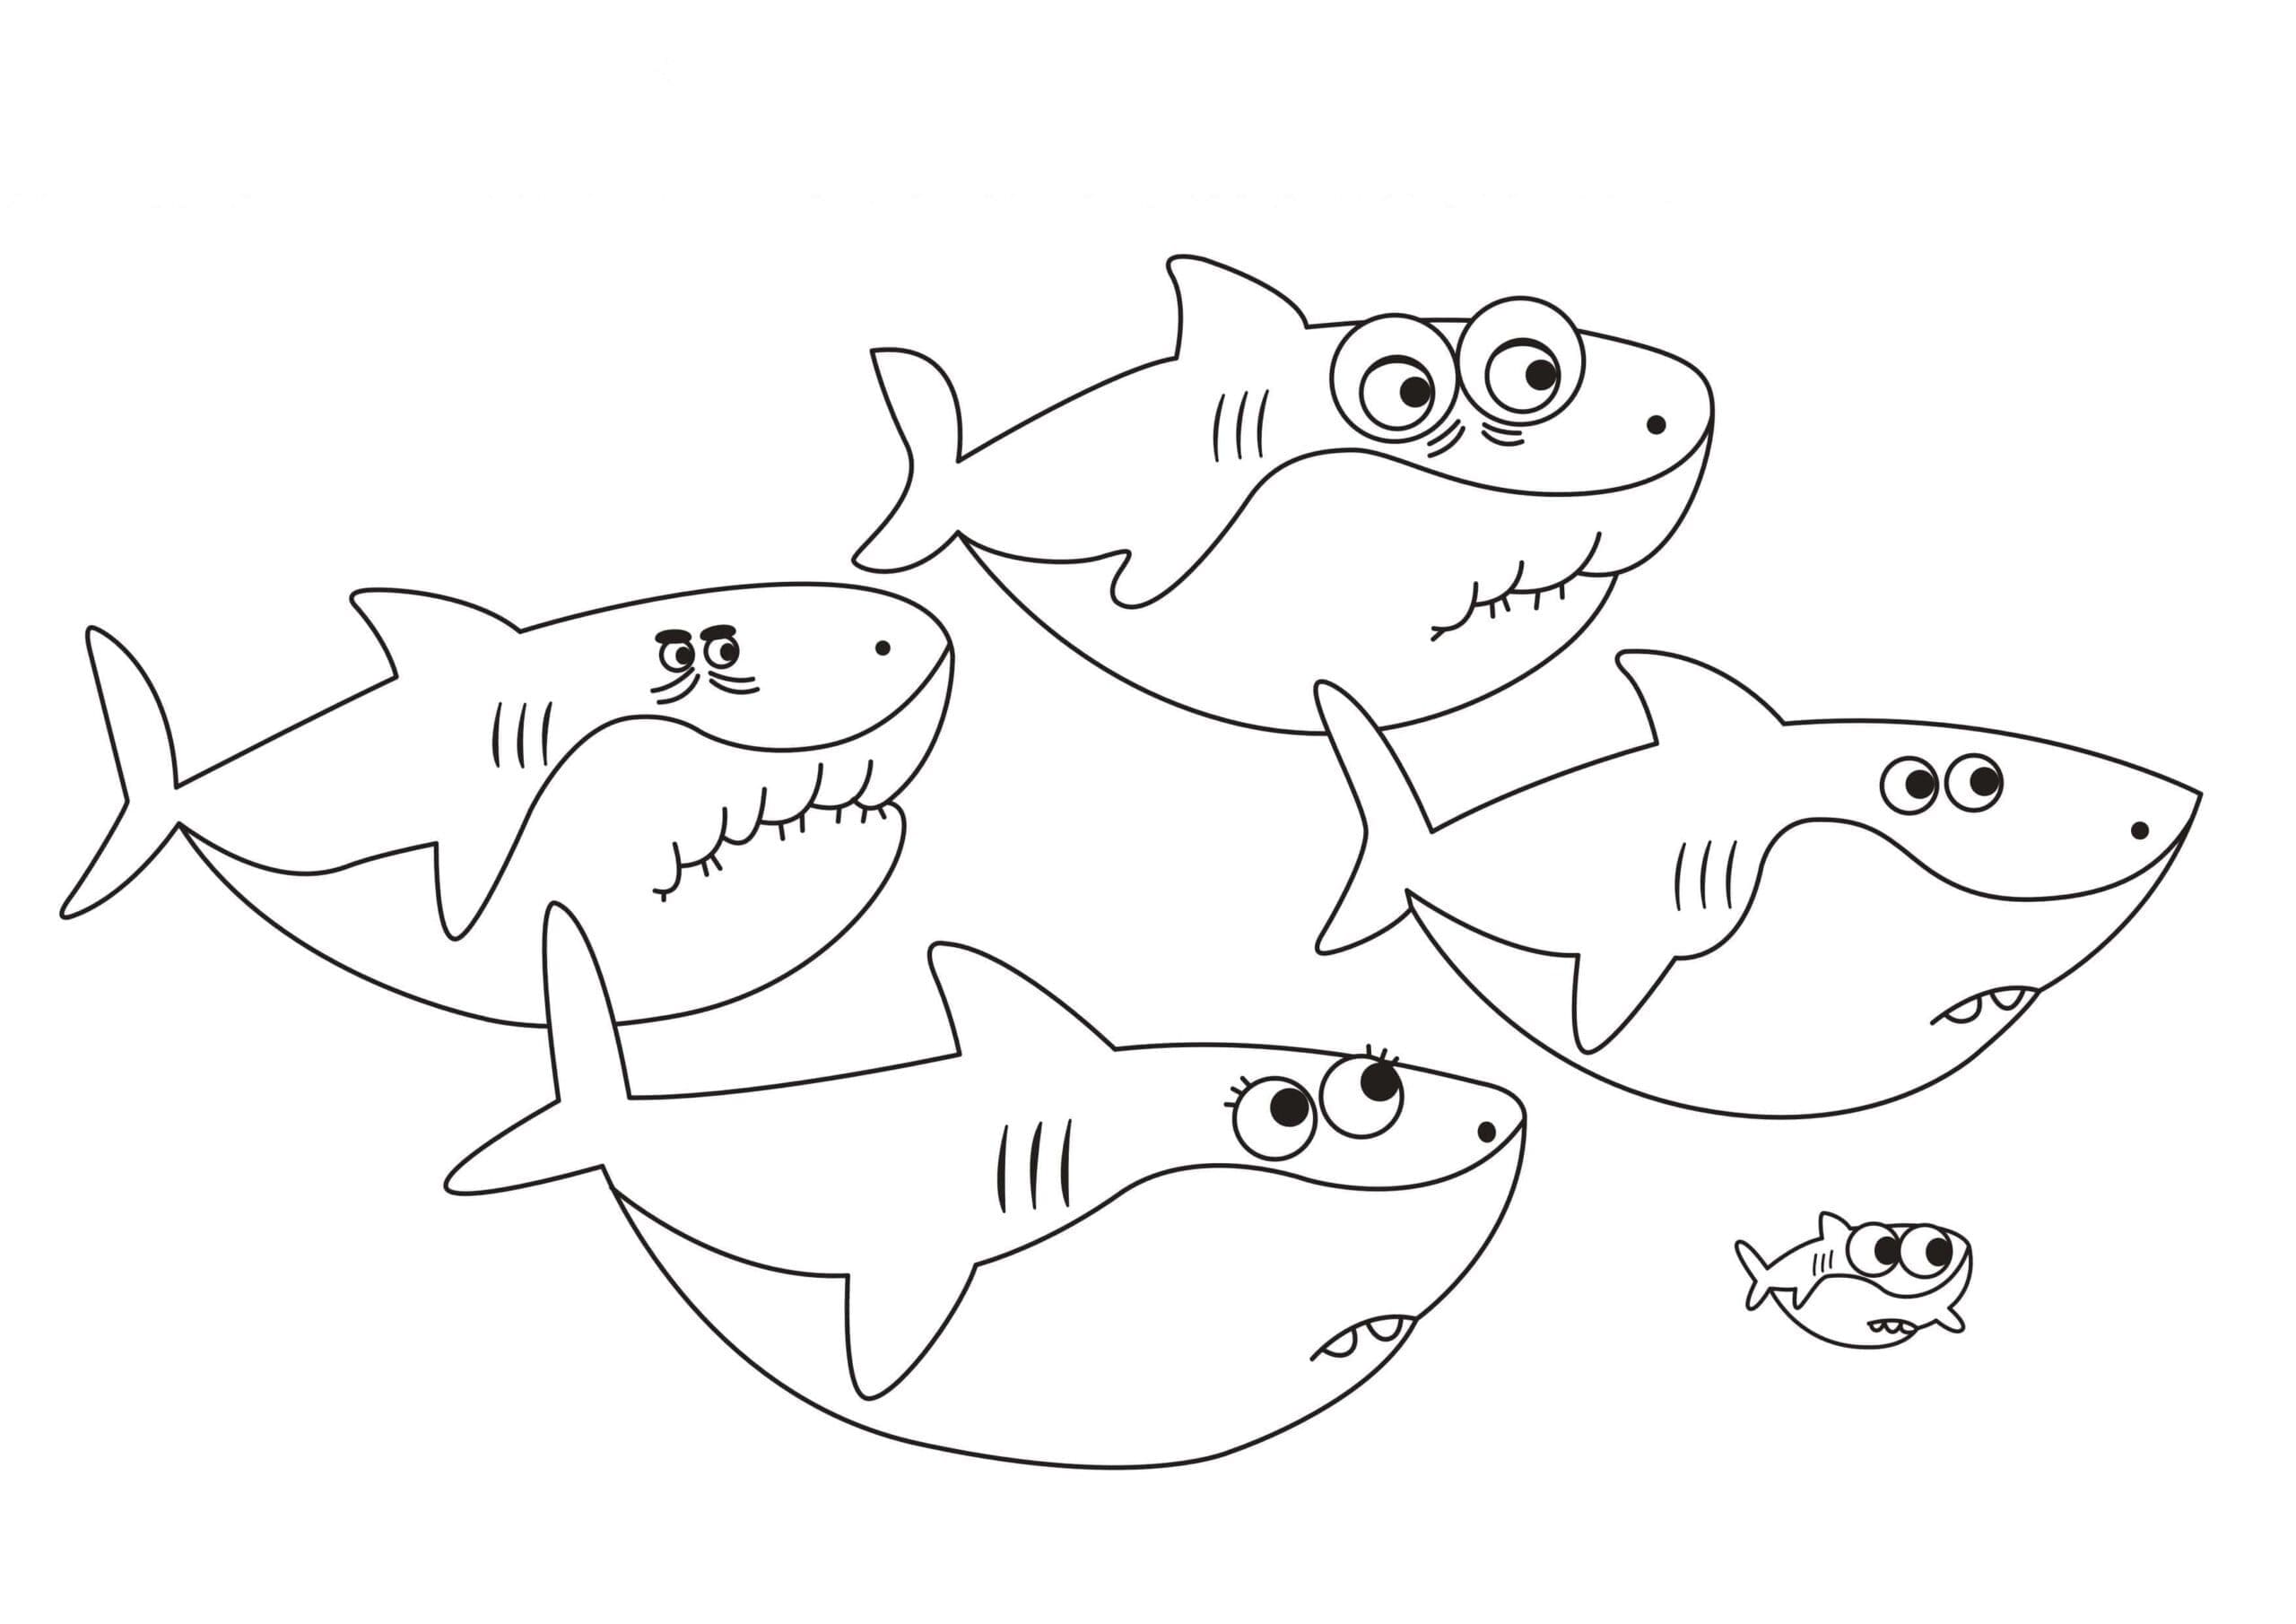 Baby Shark Free Coloring Page   Free Printable Coloring Pages for Kids